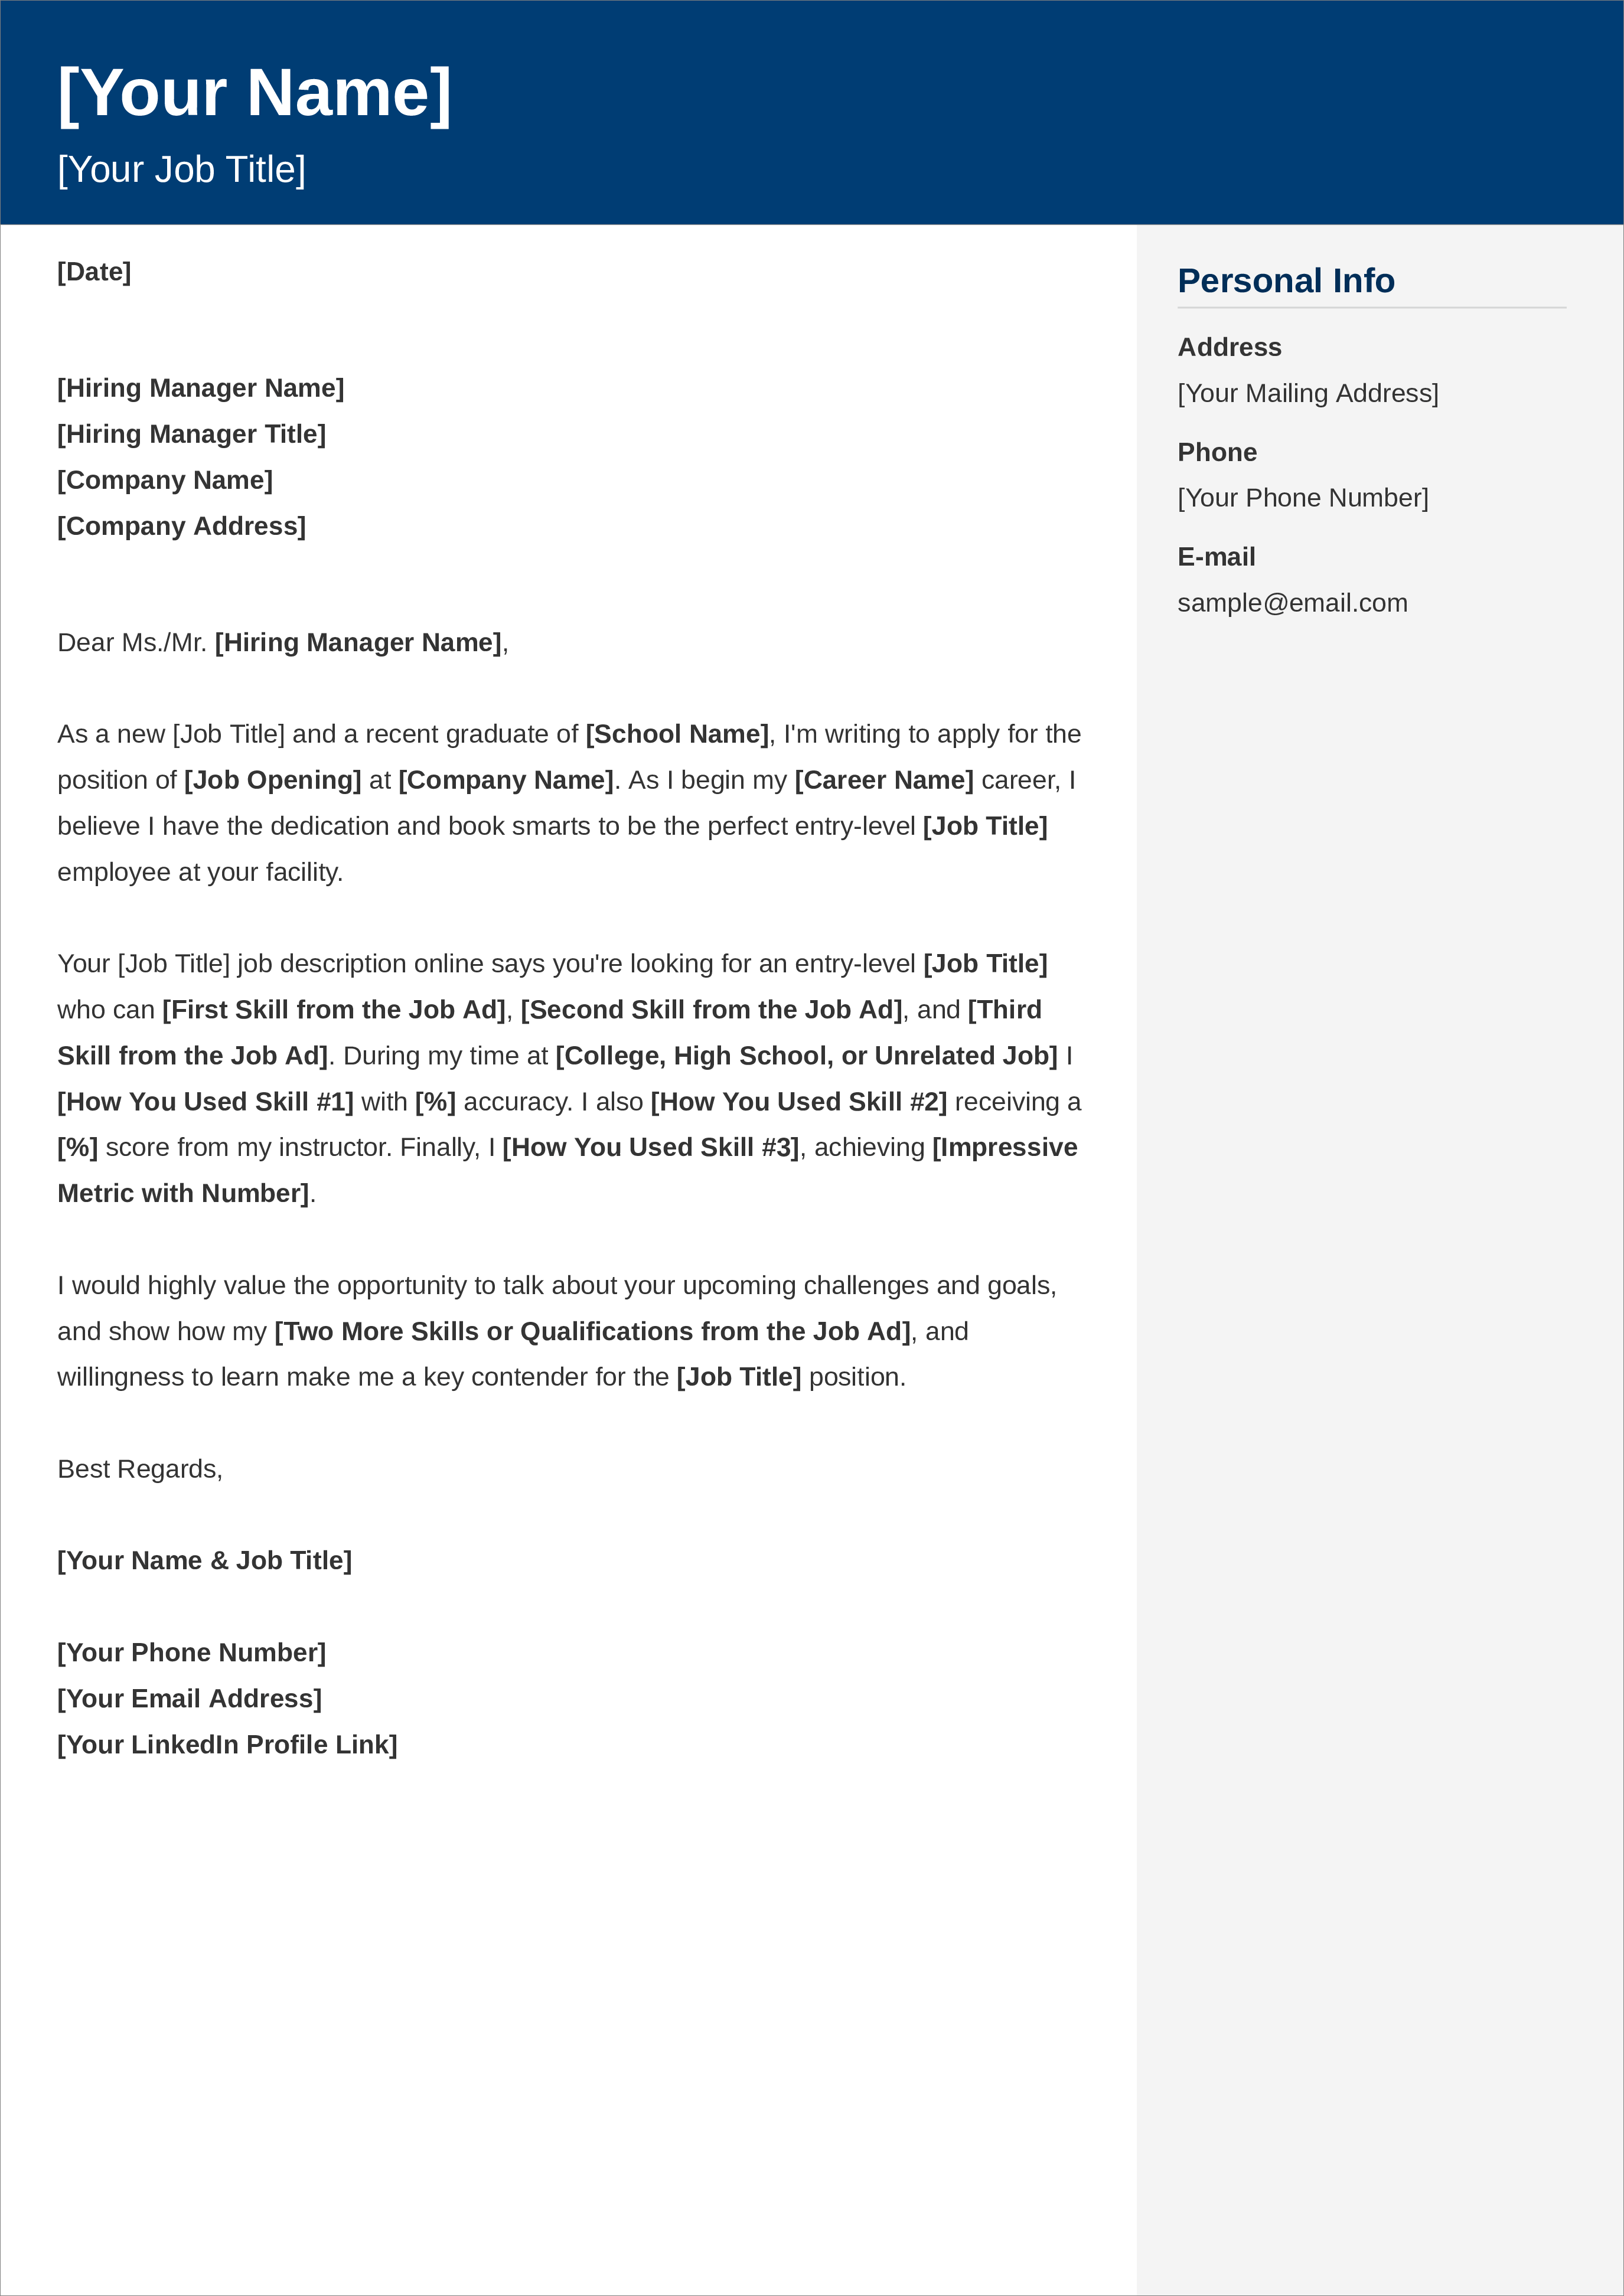 General Cover Letter That’s Not Generic: Free Samples (2022)